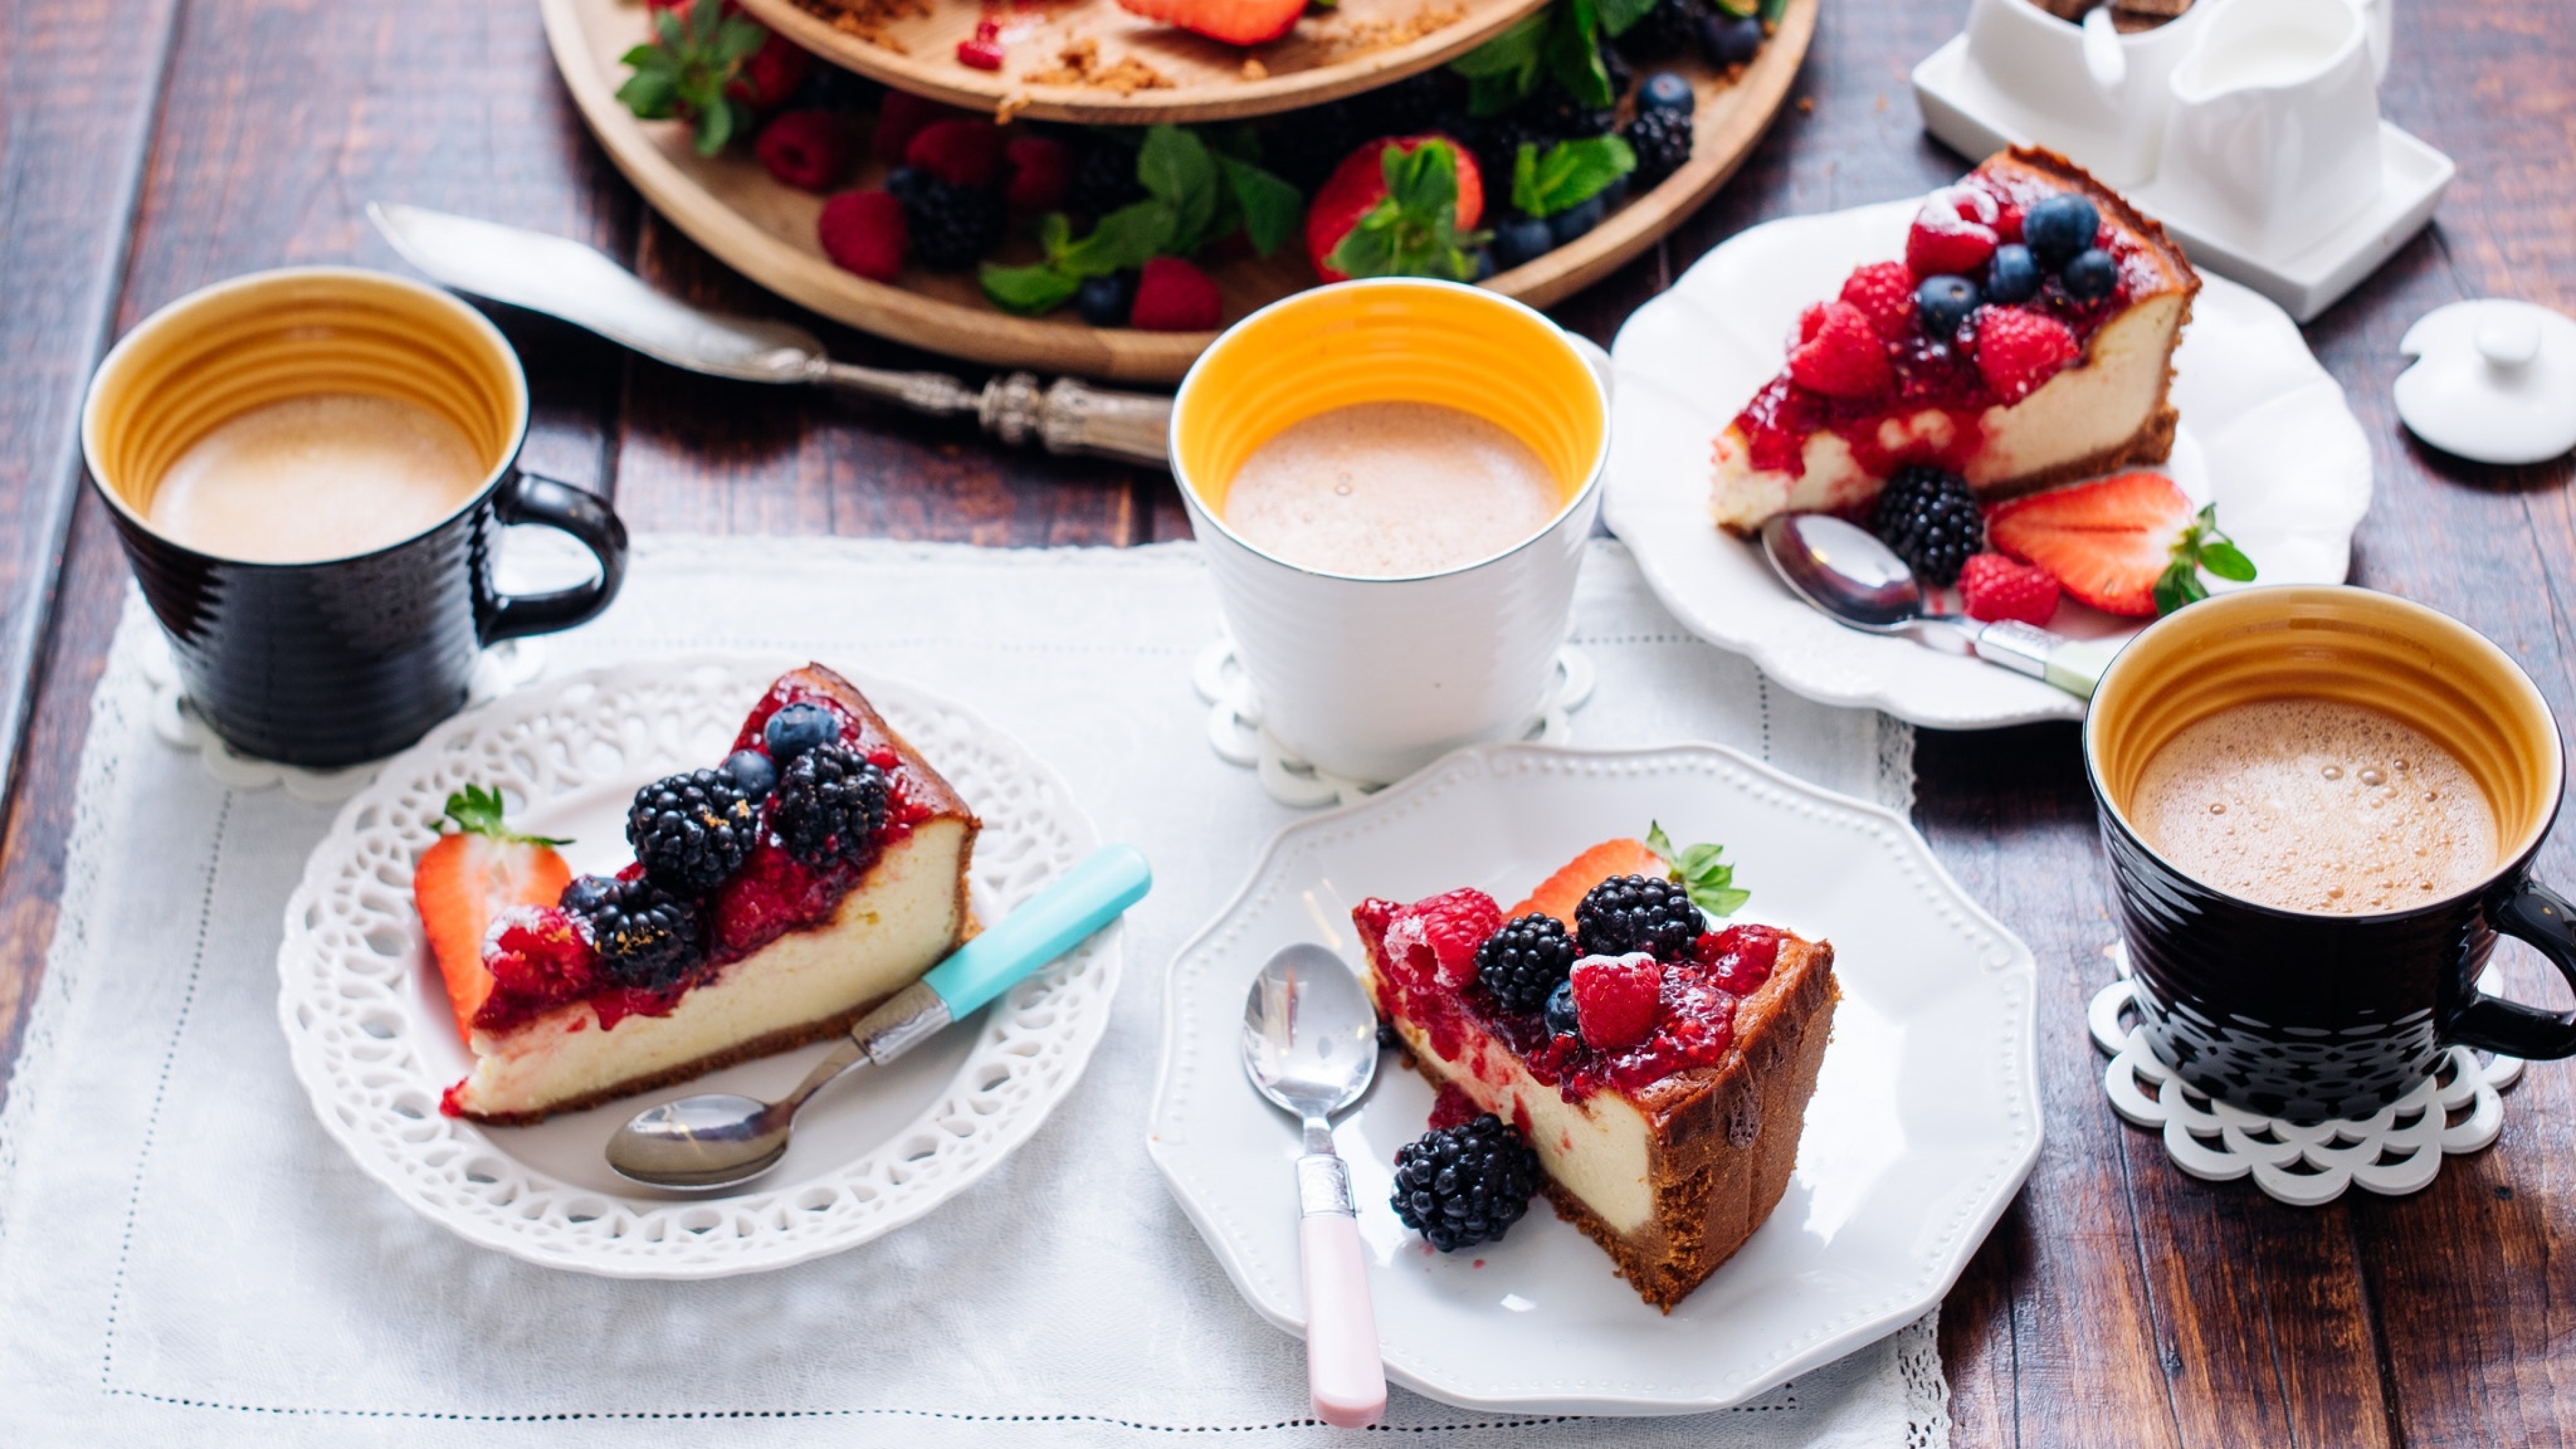 https://on-desktop.com/wps/2018Food___Cakes_and_Sweet_Cheesecake_with_berries_on_a_table_with_coffee_126704_.jpg